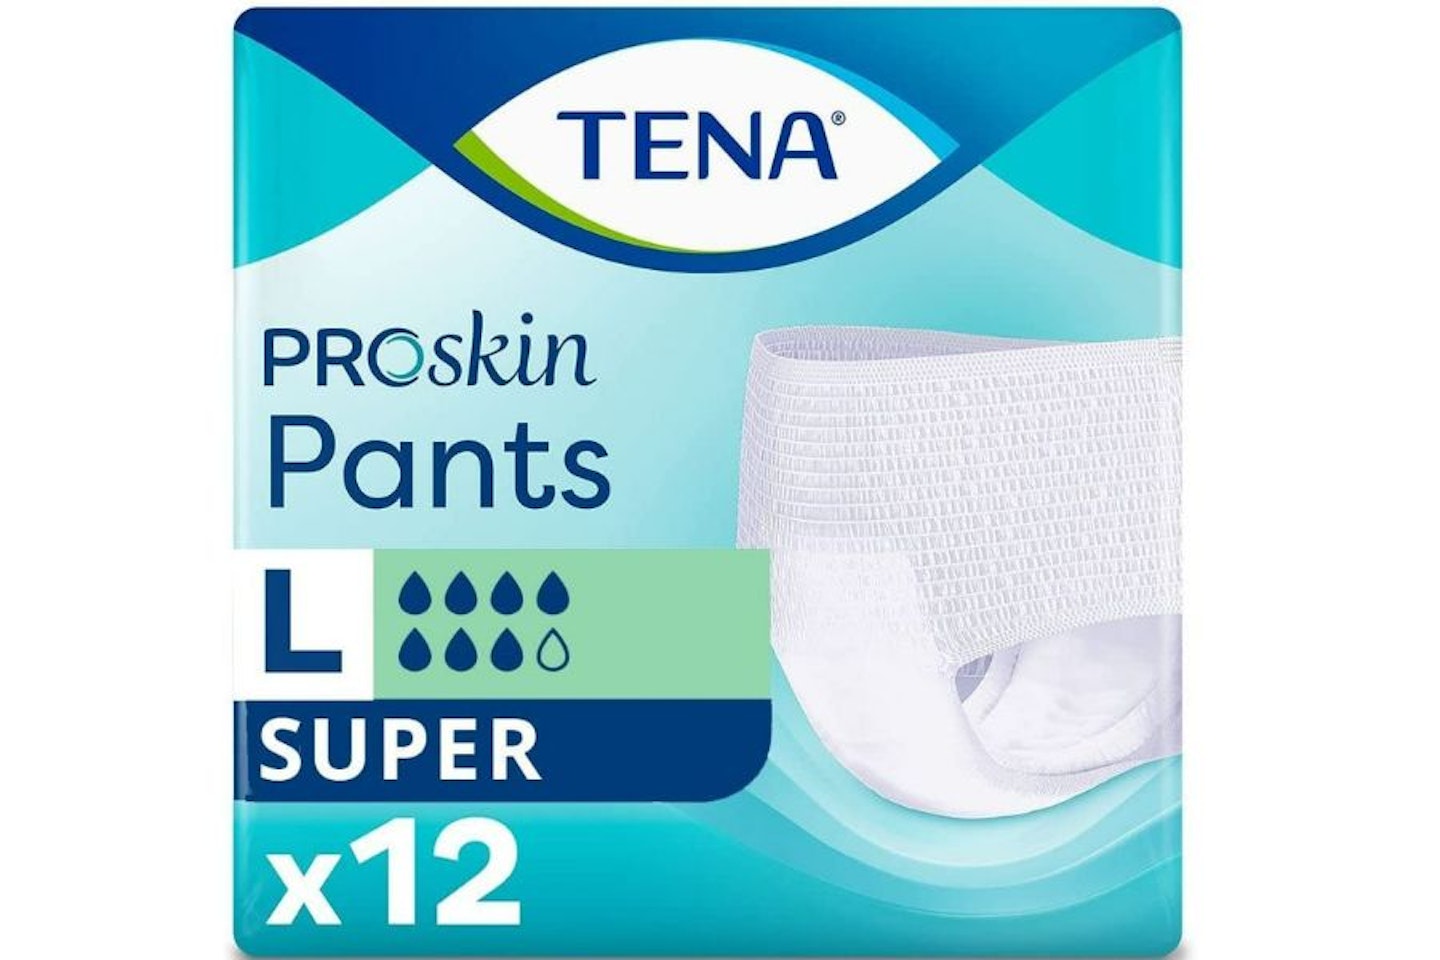 ✓ Maternity Knickers Disposable 100% Cotton Hospital Briefs Breathable Pants  5pk